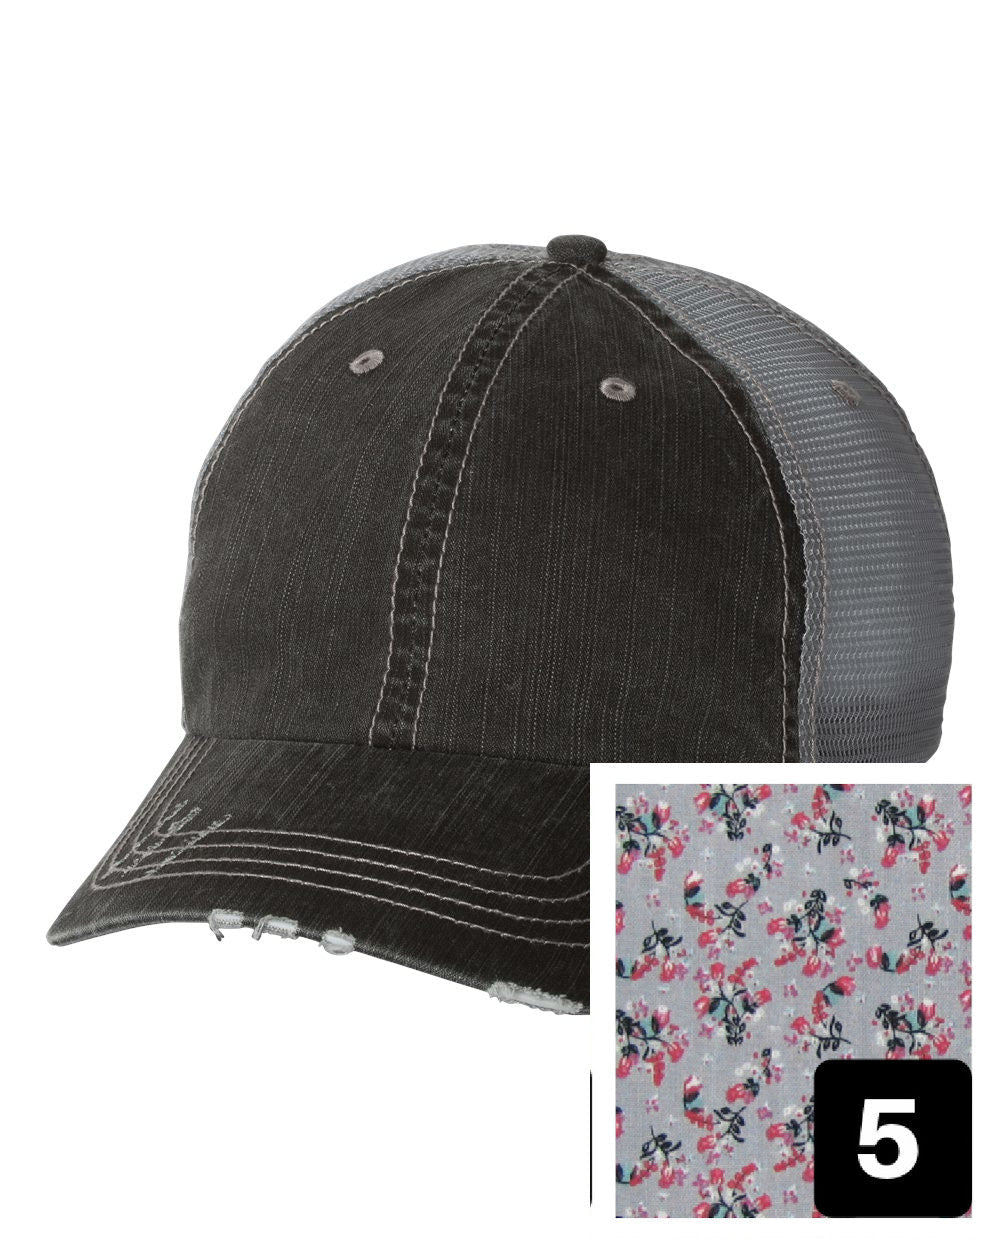 gray distressed trucker hat with purple and pink floral fabric state of New Mexico